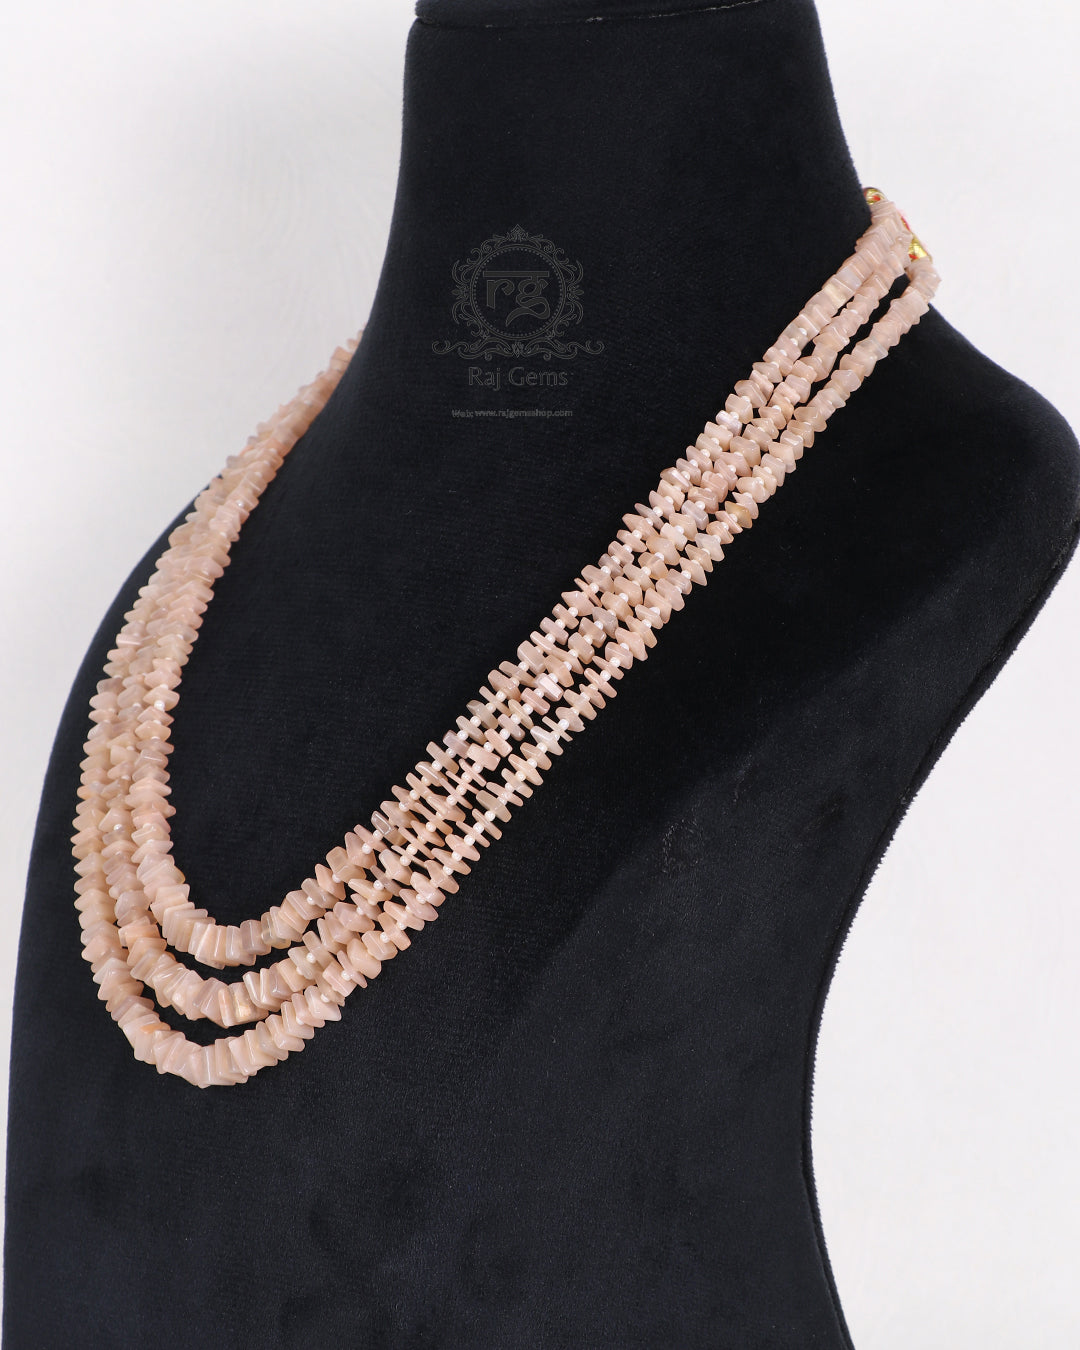 Natural Peach Moonstone Gemstone Beads Necklace Jewelry